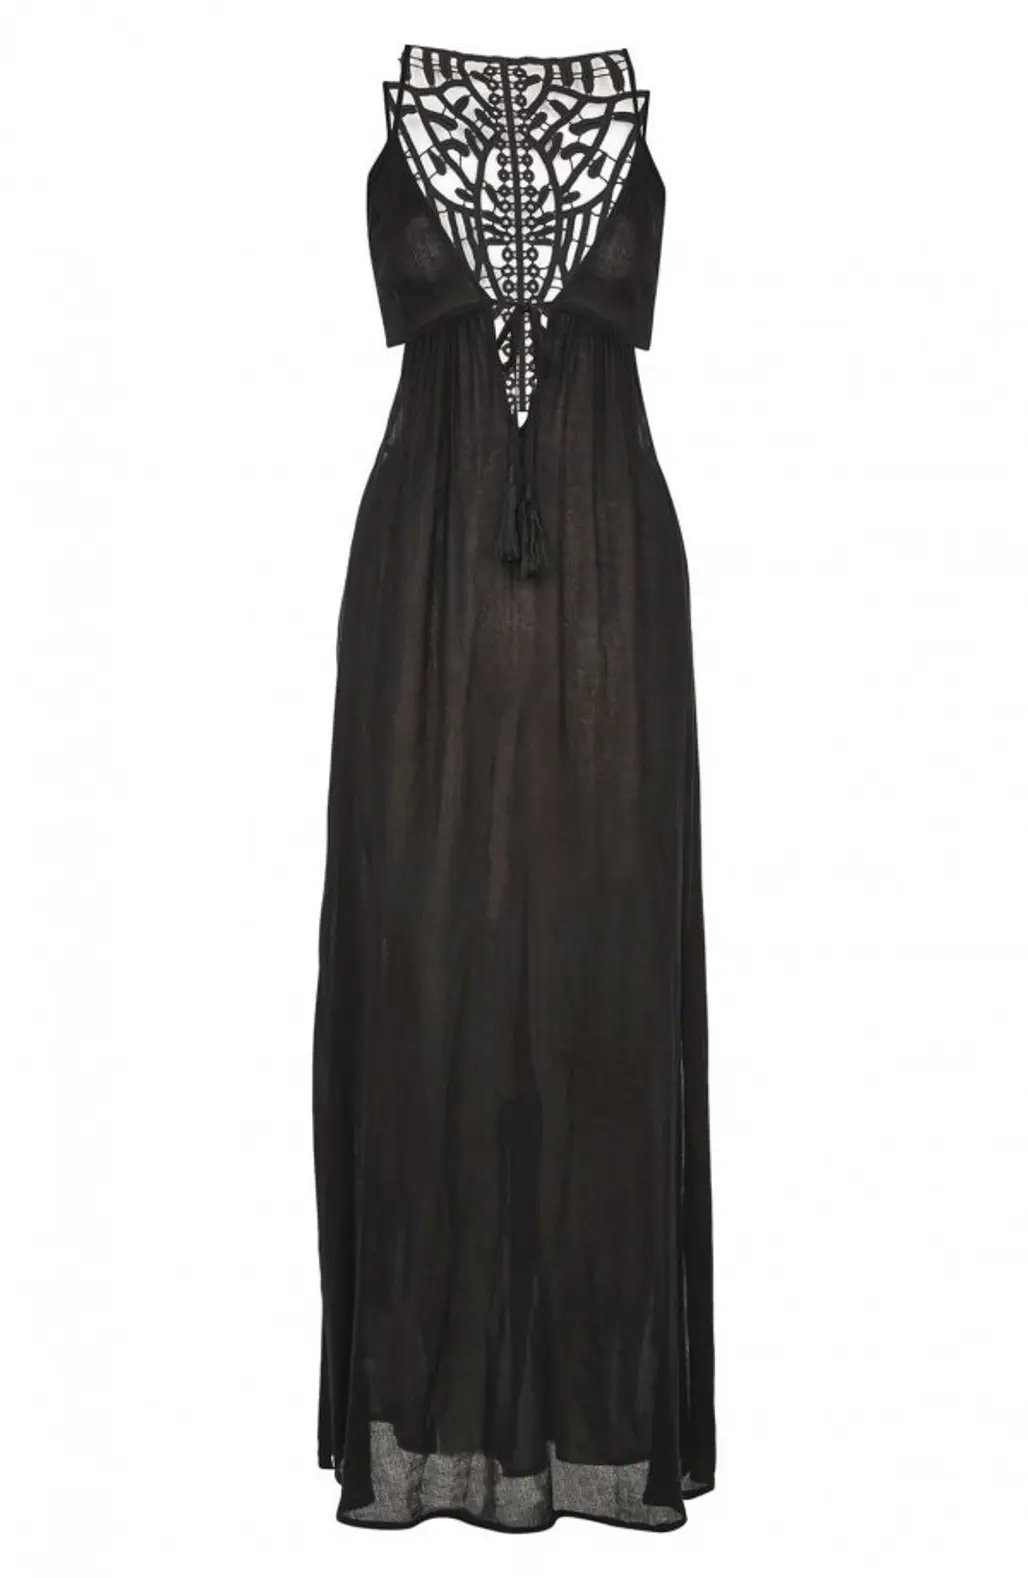 dress, clothing, day dress, black, gown,